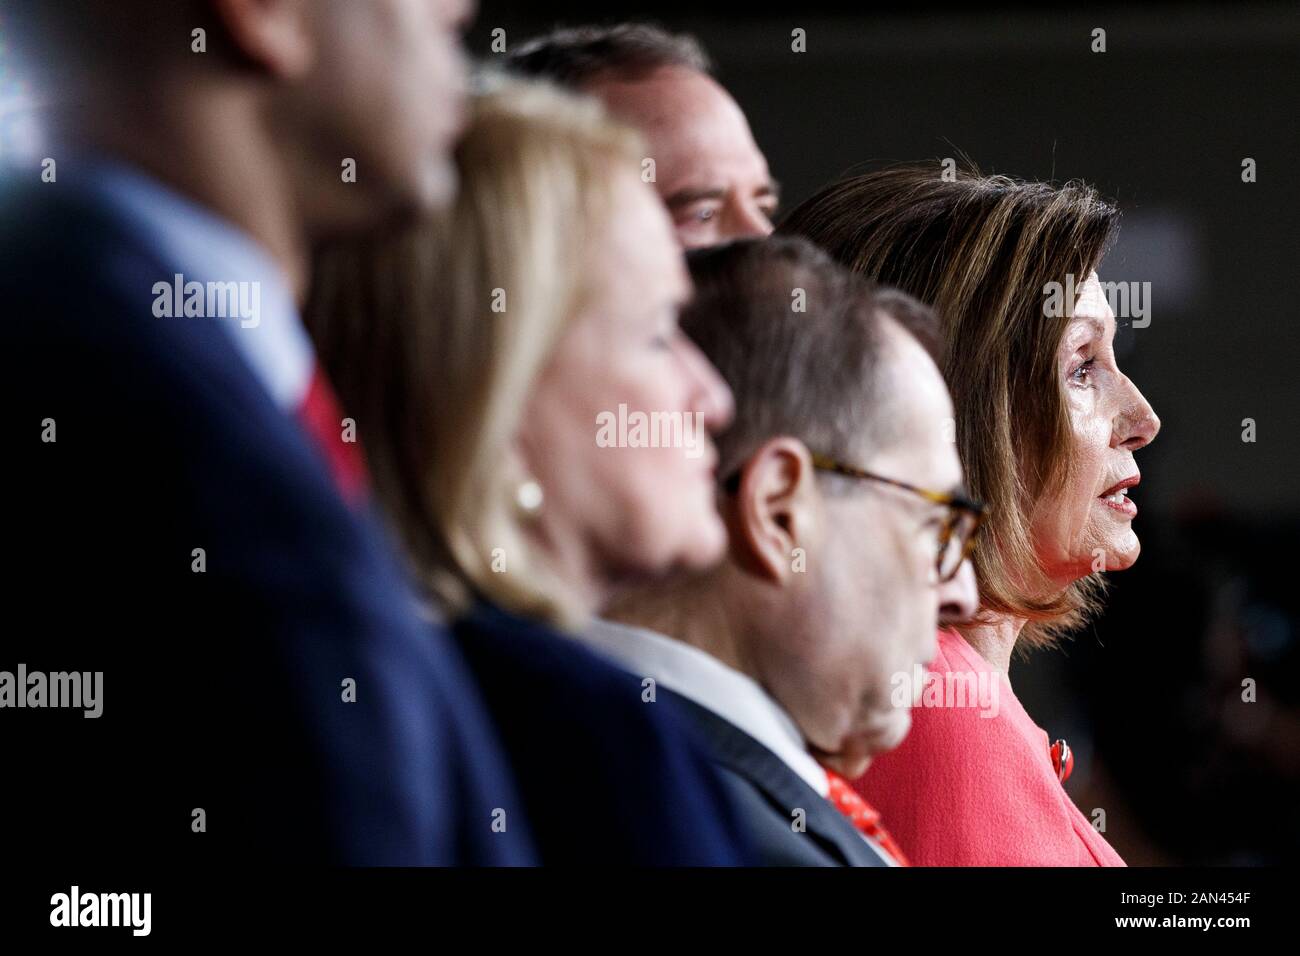 Washington, USA. 15th Jan, 2020. U.S. House Speaker Nancy Pelosi (1st R) speaks during a press conference in Washington, DC, the United States, on Jan. 15, 2020. The U.S. House of Representatives officially sent impeachment articles against President Donald Trump to the Senate on Wednesday evening to allow a trial to get underway. Credit: Ting Shen/Xinhua/Alamy Live News Stock Photo